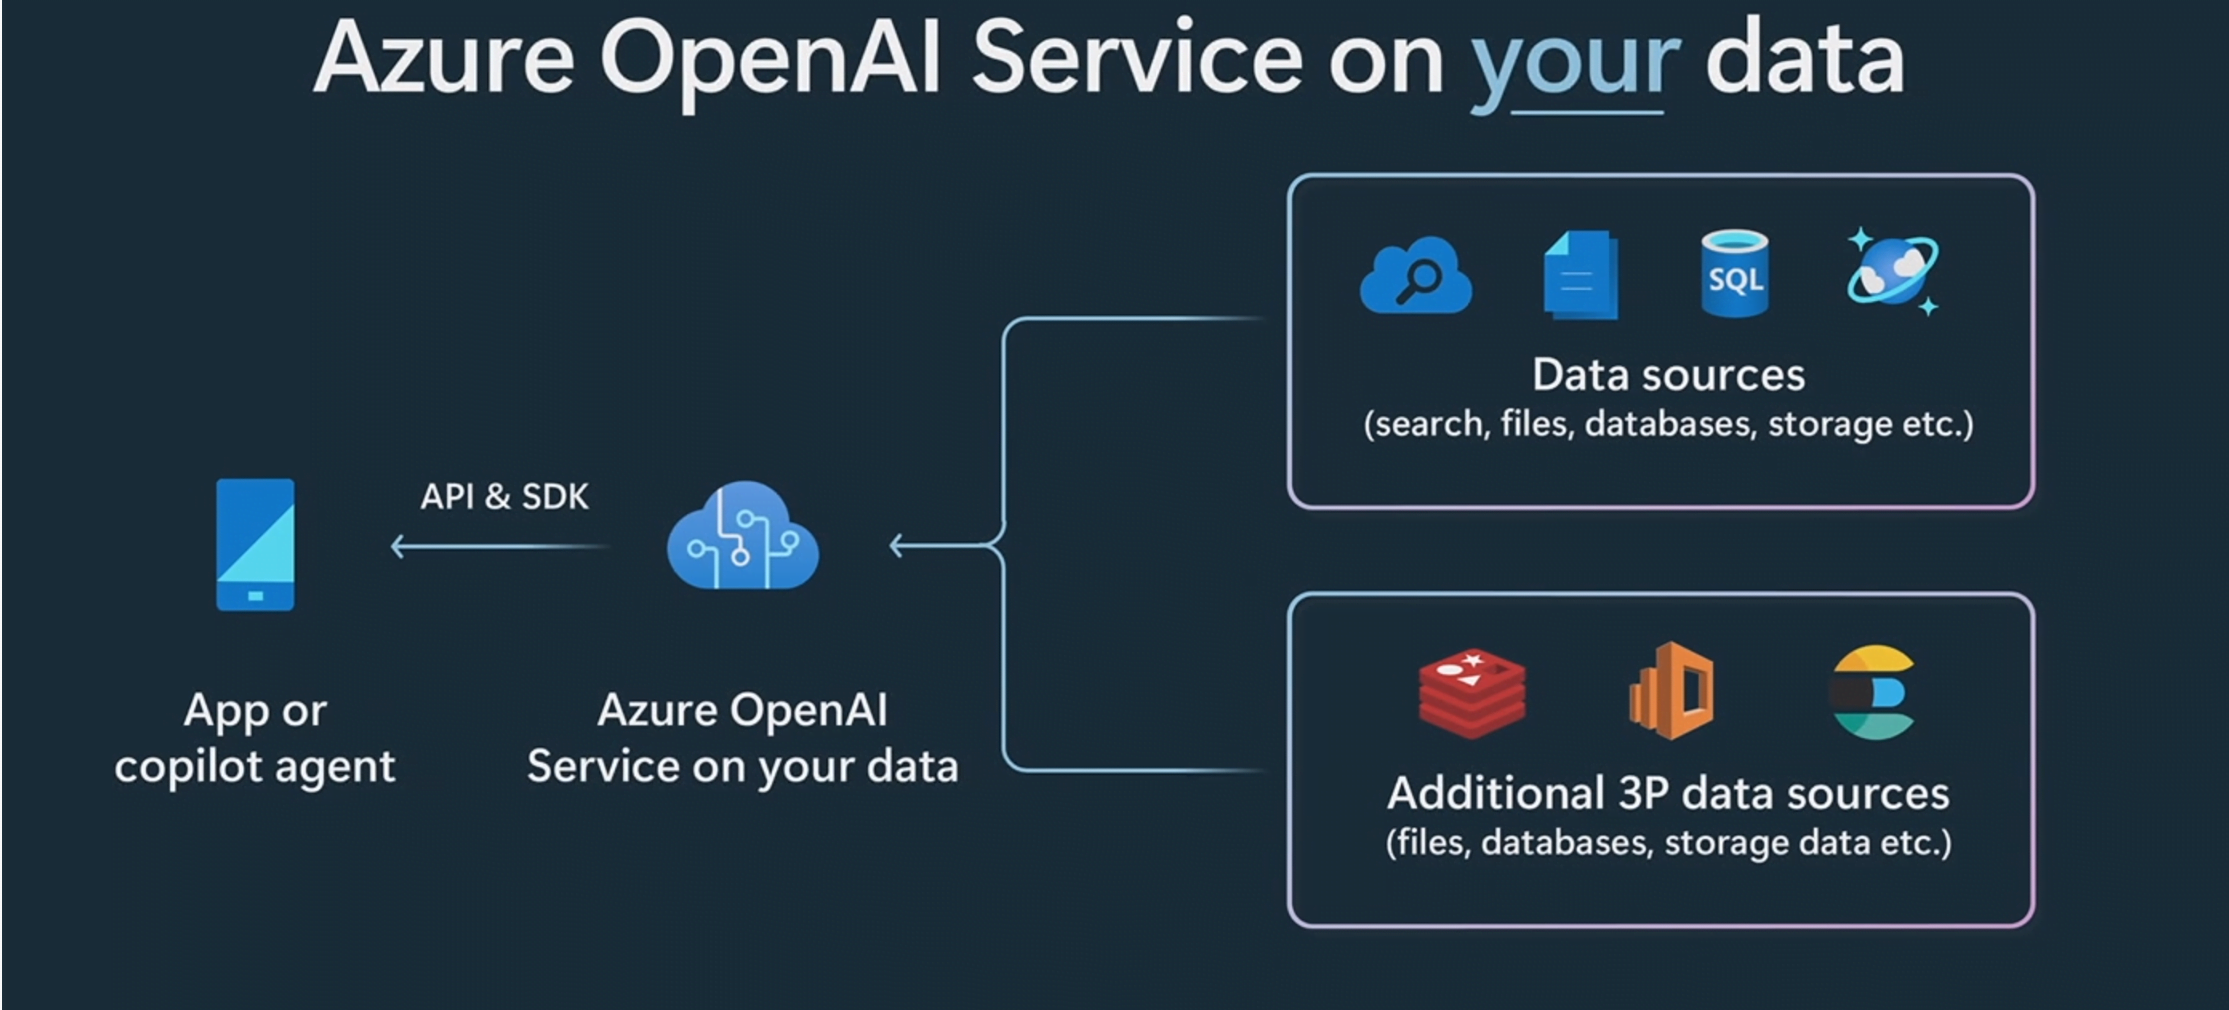 AOAI Service on your data